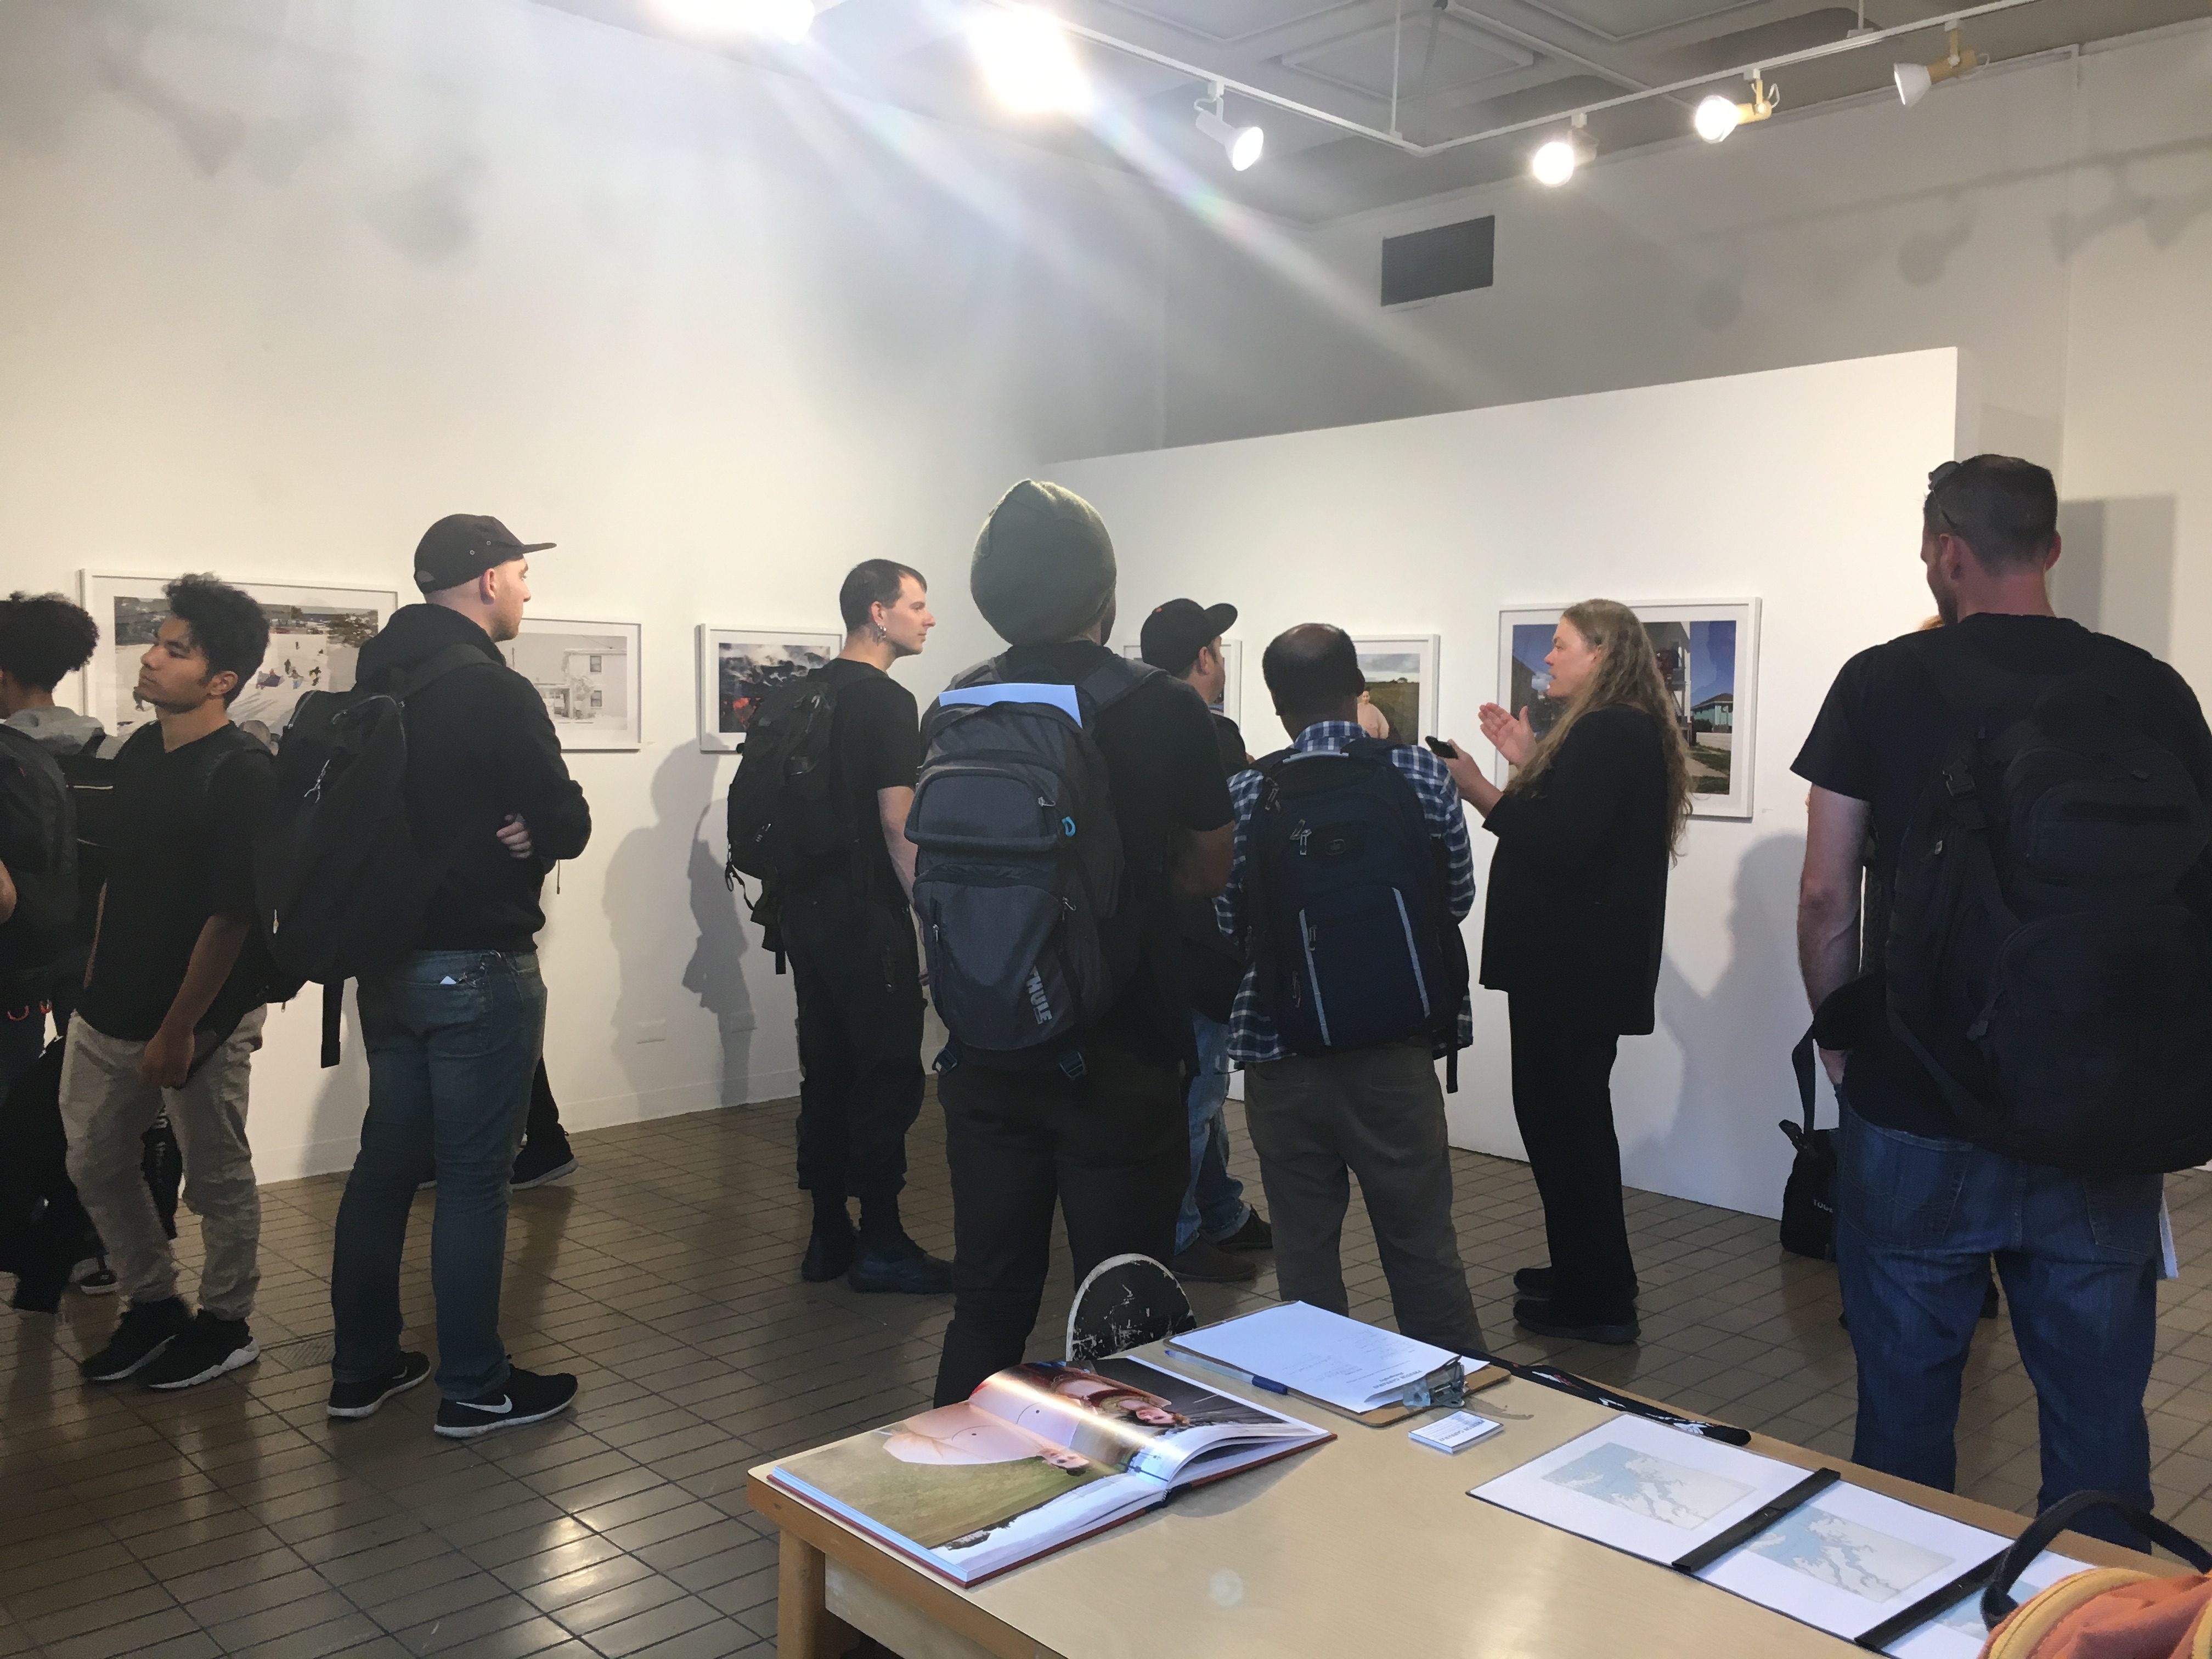 CCSF professor Judith Lynn Walgren discusses the meaning of aperture to CCSF photography and watercolor students at Preston Gannaway’s exhibition on September 6, 2017. (Photo by Laurie Maemura)